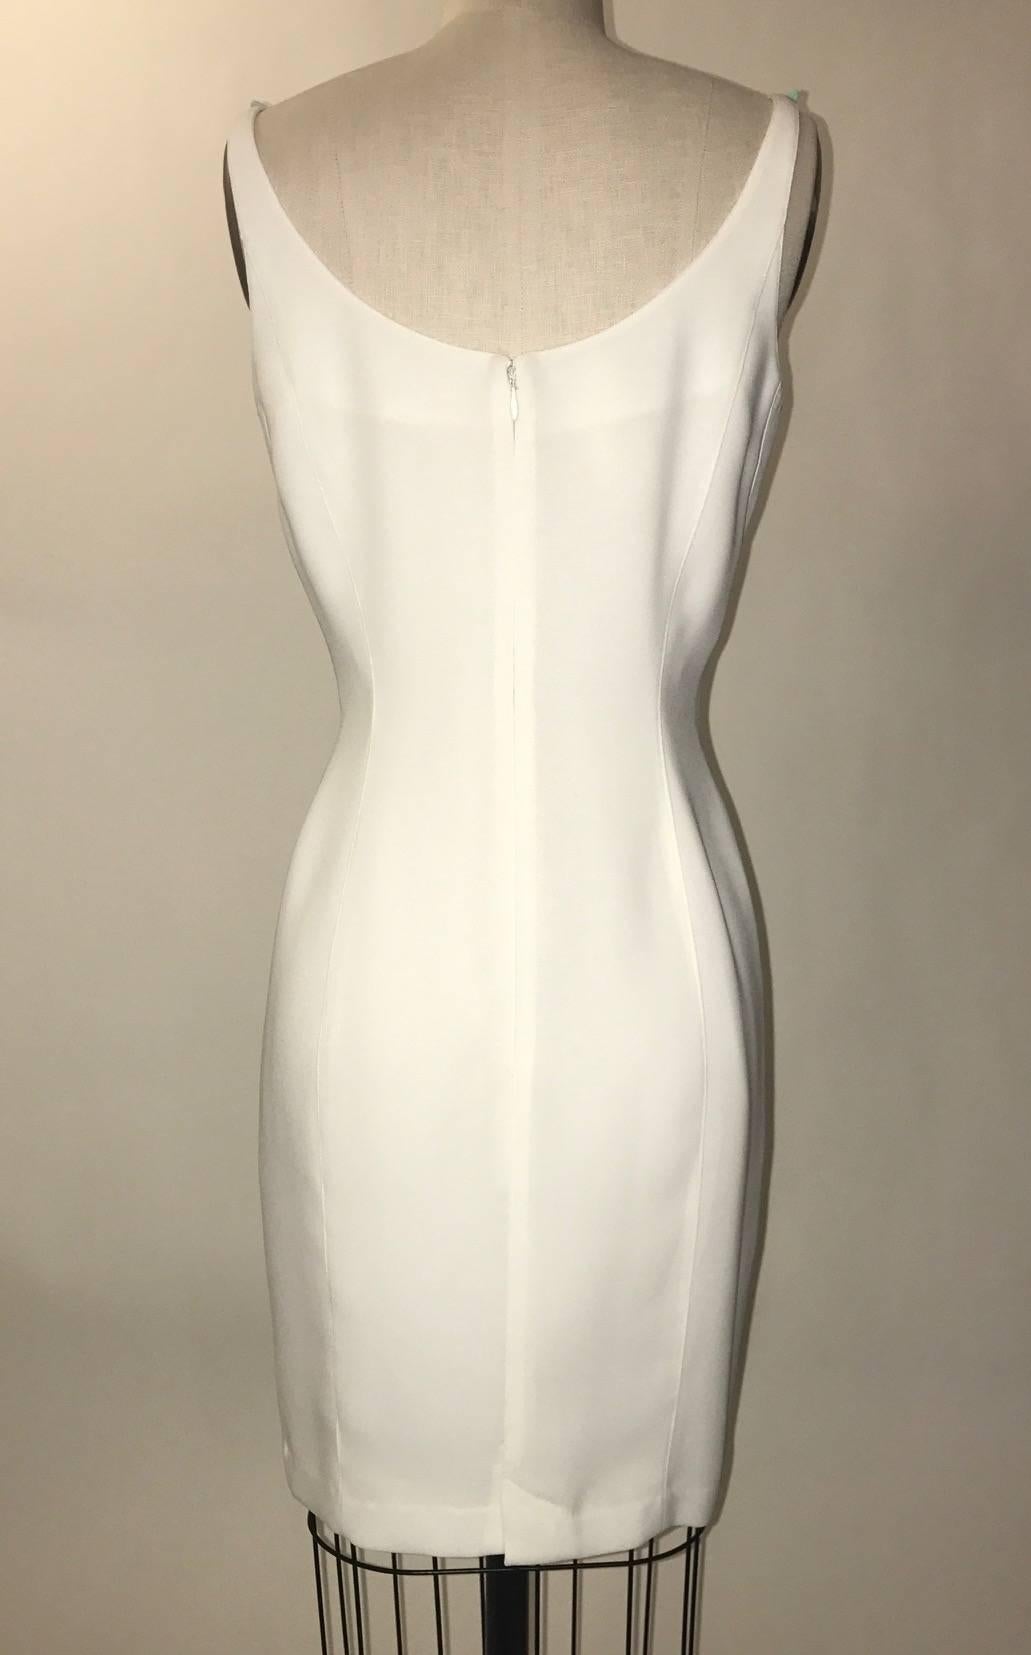 Thierry Mugler white fitted sleeveless crepe dress with light blue and green detailing at top. Back zip and hook and eye.

Crepe, fully lined.

Made in France.

Labelled size FR 38, approximate US 6 but may run small, see measurements.
Bust